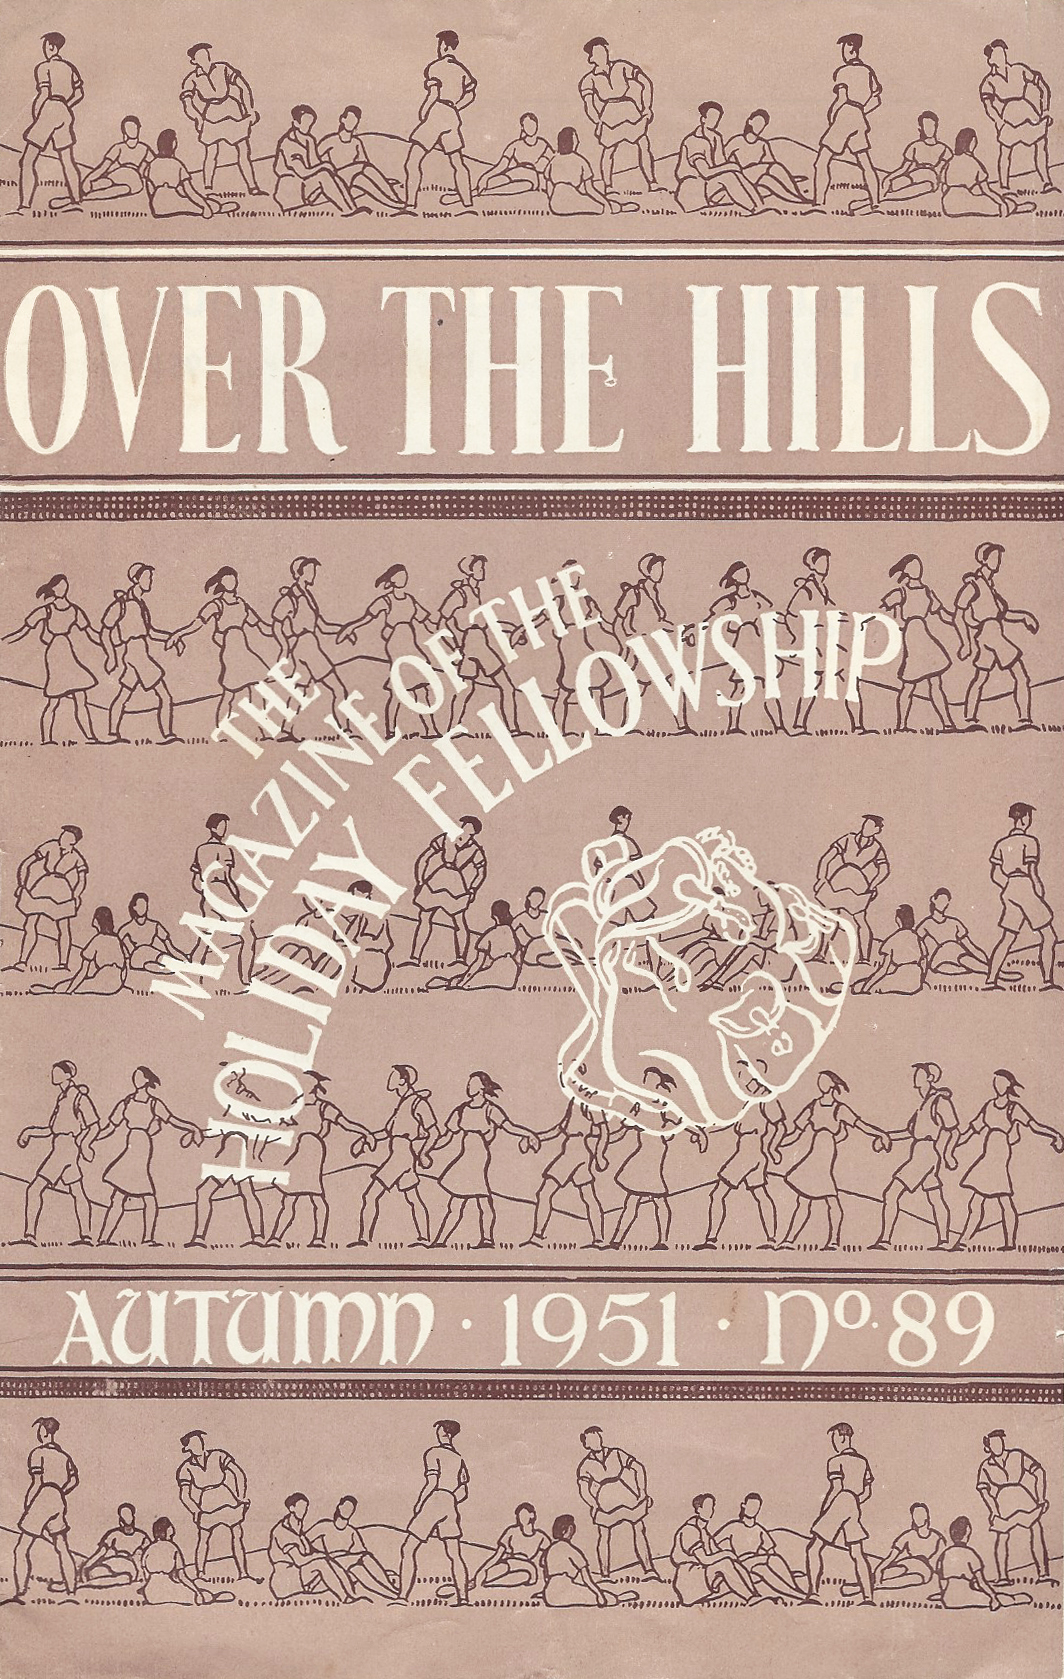 Over the Hills, Autumn 1951